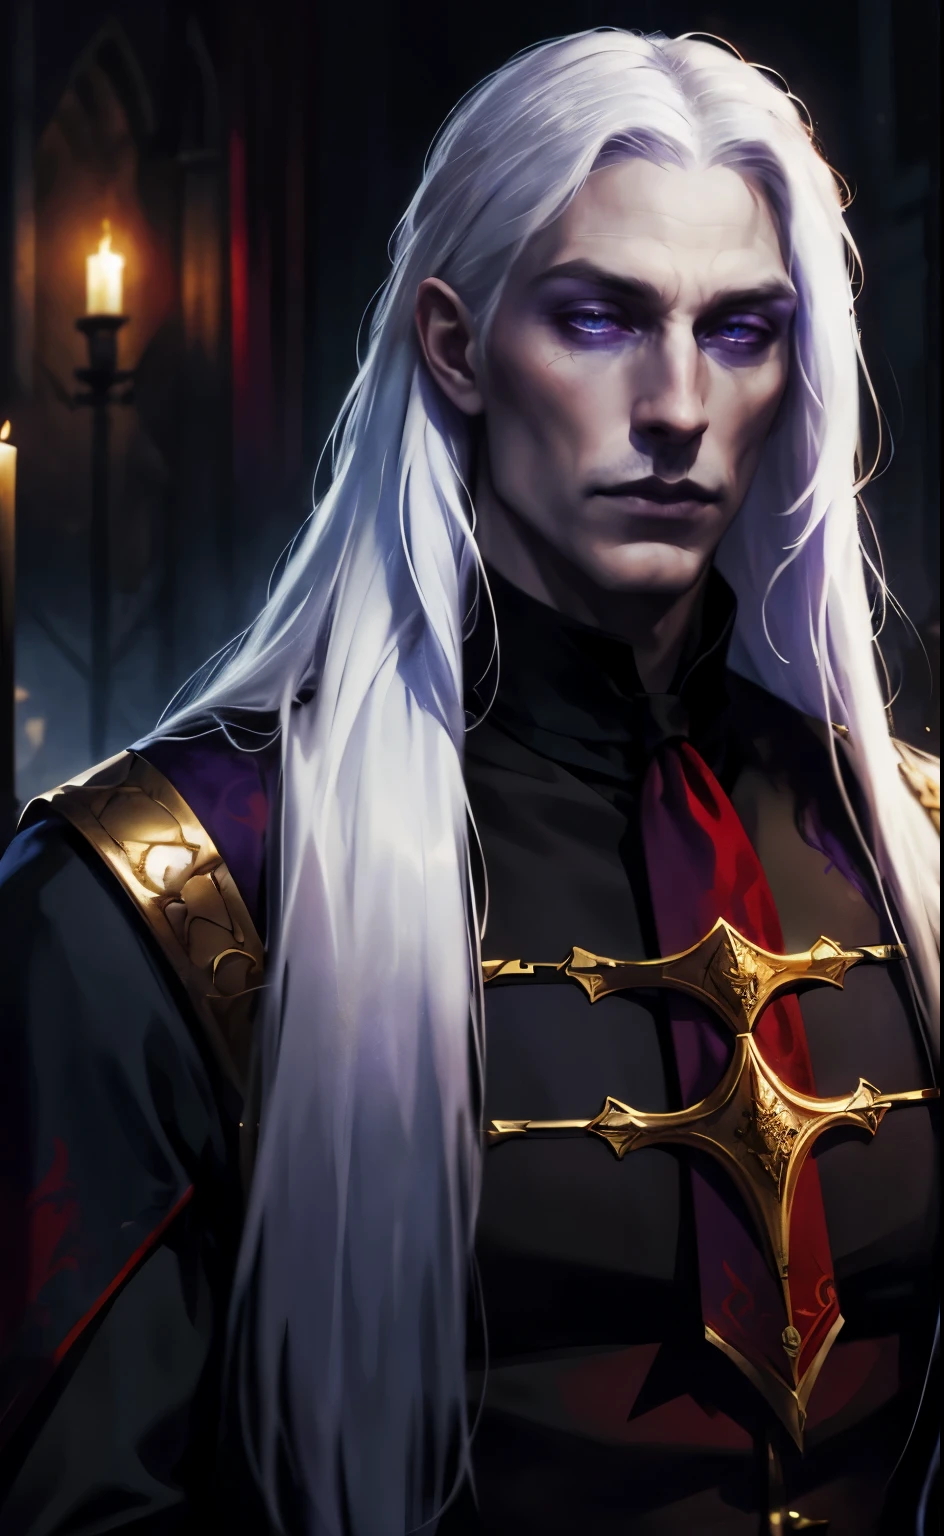 Dark Fantasy, Middle Ages, Targaryen, prince, man, with long straight white hair, pale skin, purple eyes, scar on nose, strong build, black lips, face looks like Luke Goss, in a red doublet with gold buckles.